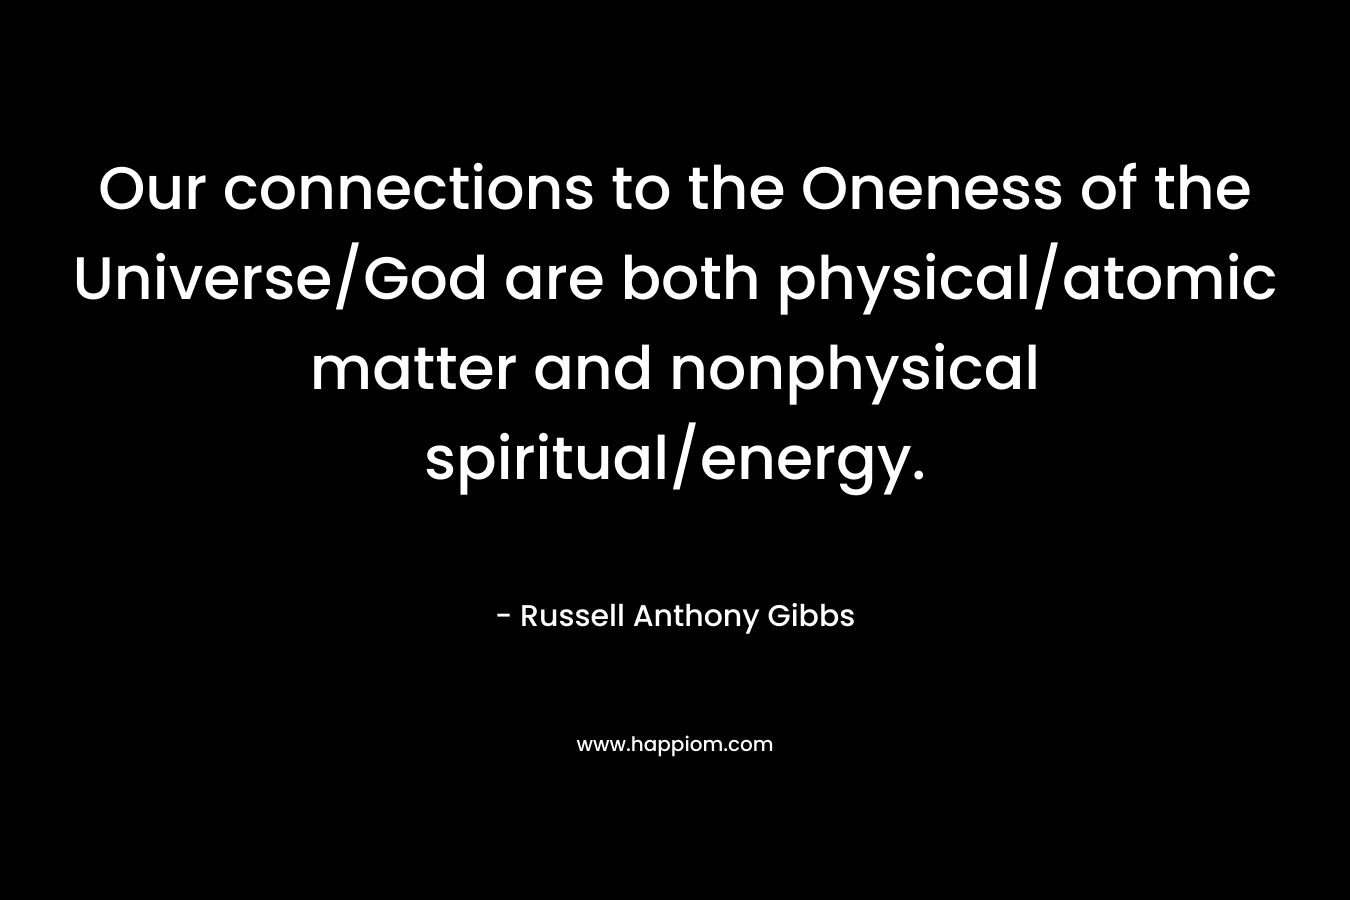 Our connections to the Oneness of the Universe/God are both physical/atomic matter and nonphysical spiritual/energy. – Russell Anthony Gibbs